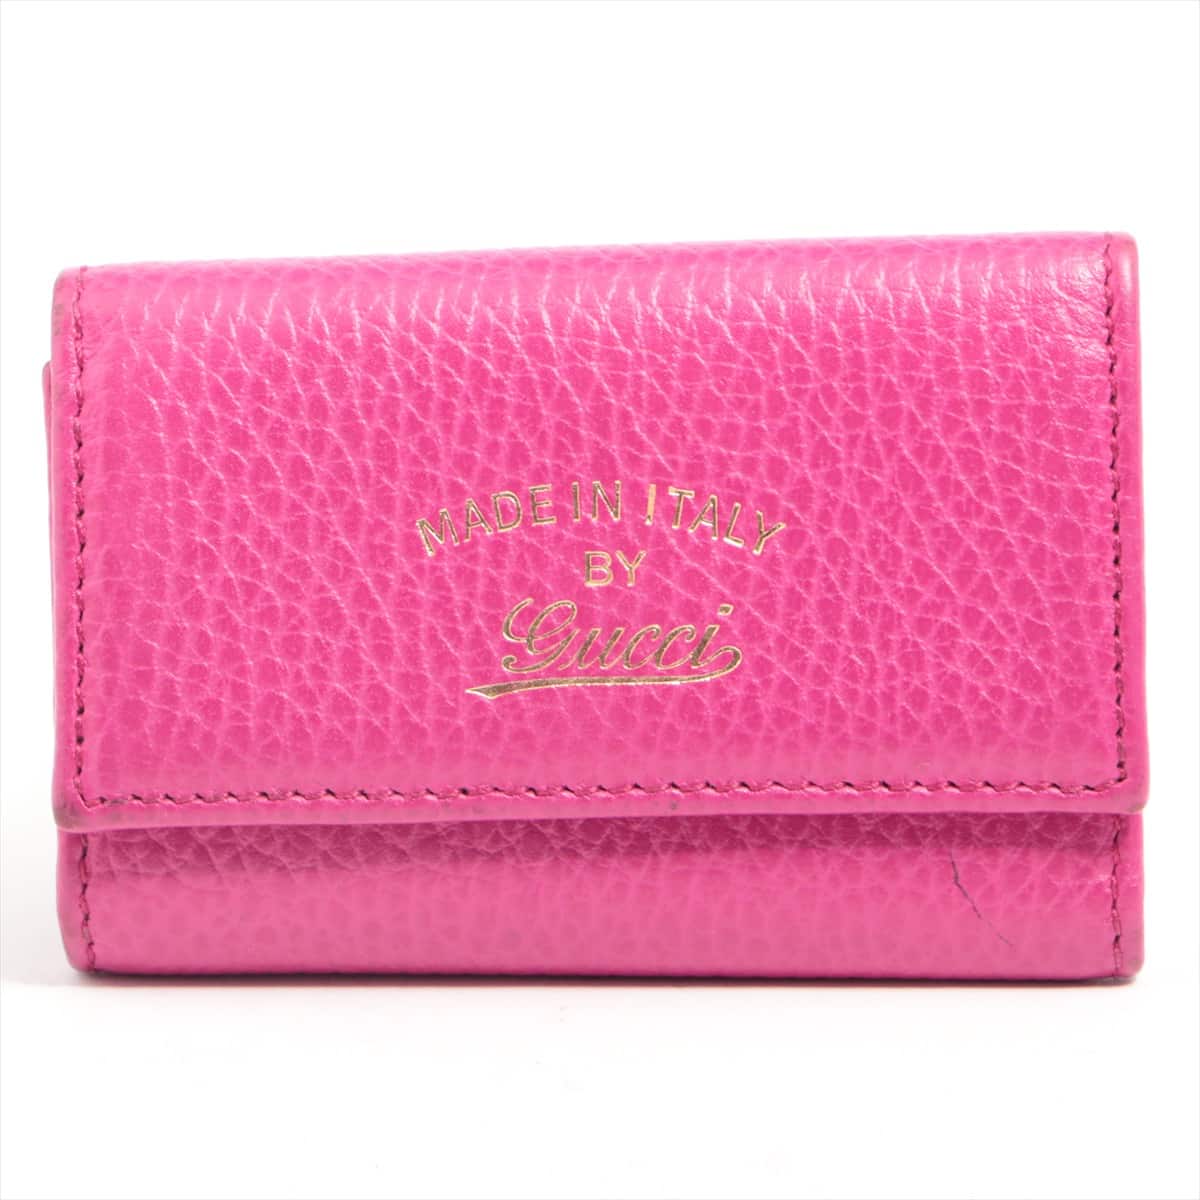 Gucci Swing 354499 Leather Key Case Pink